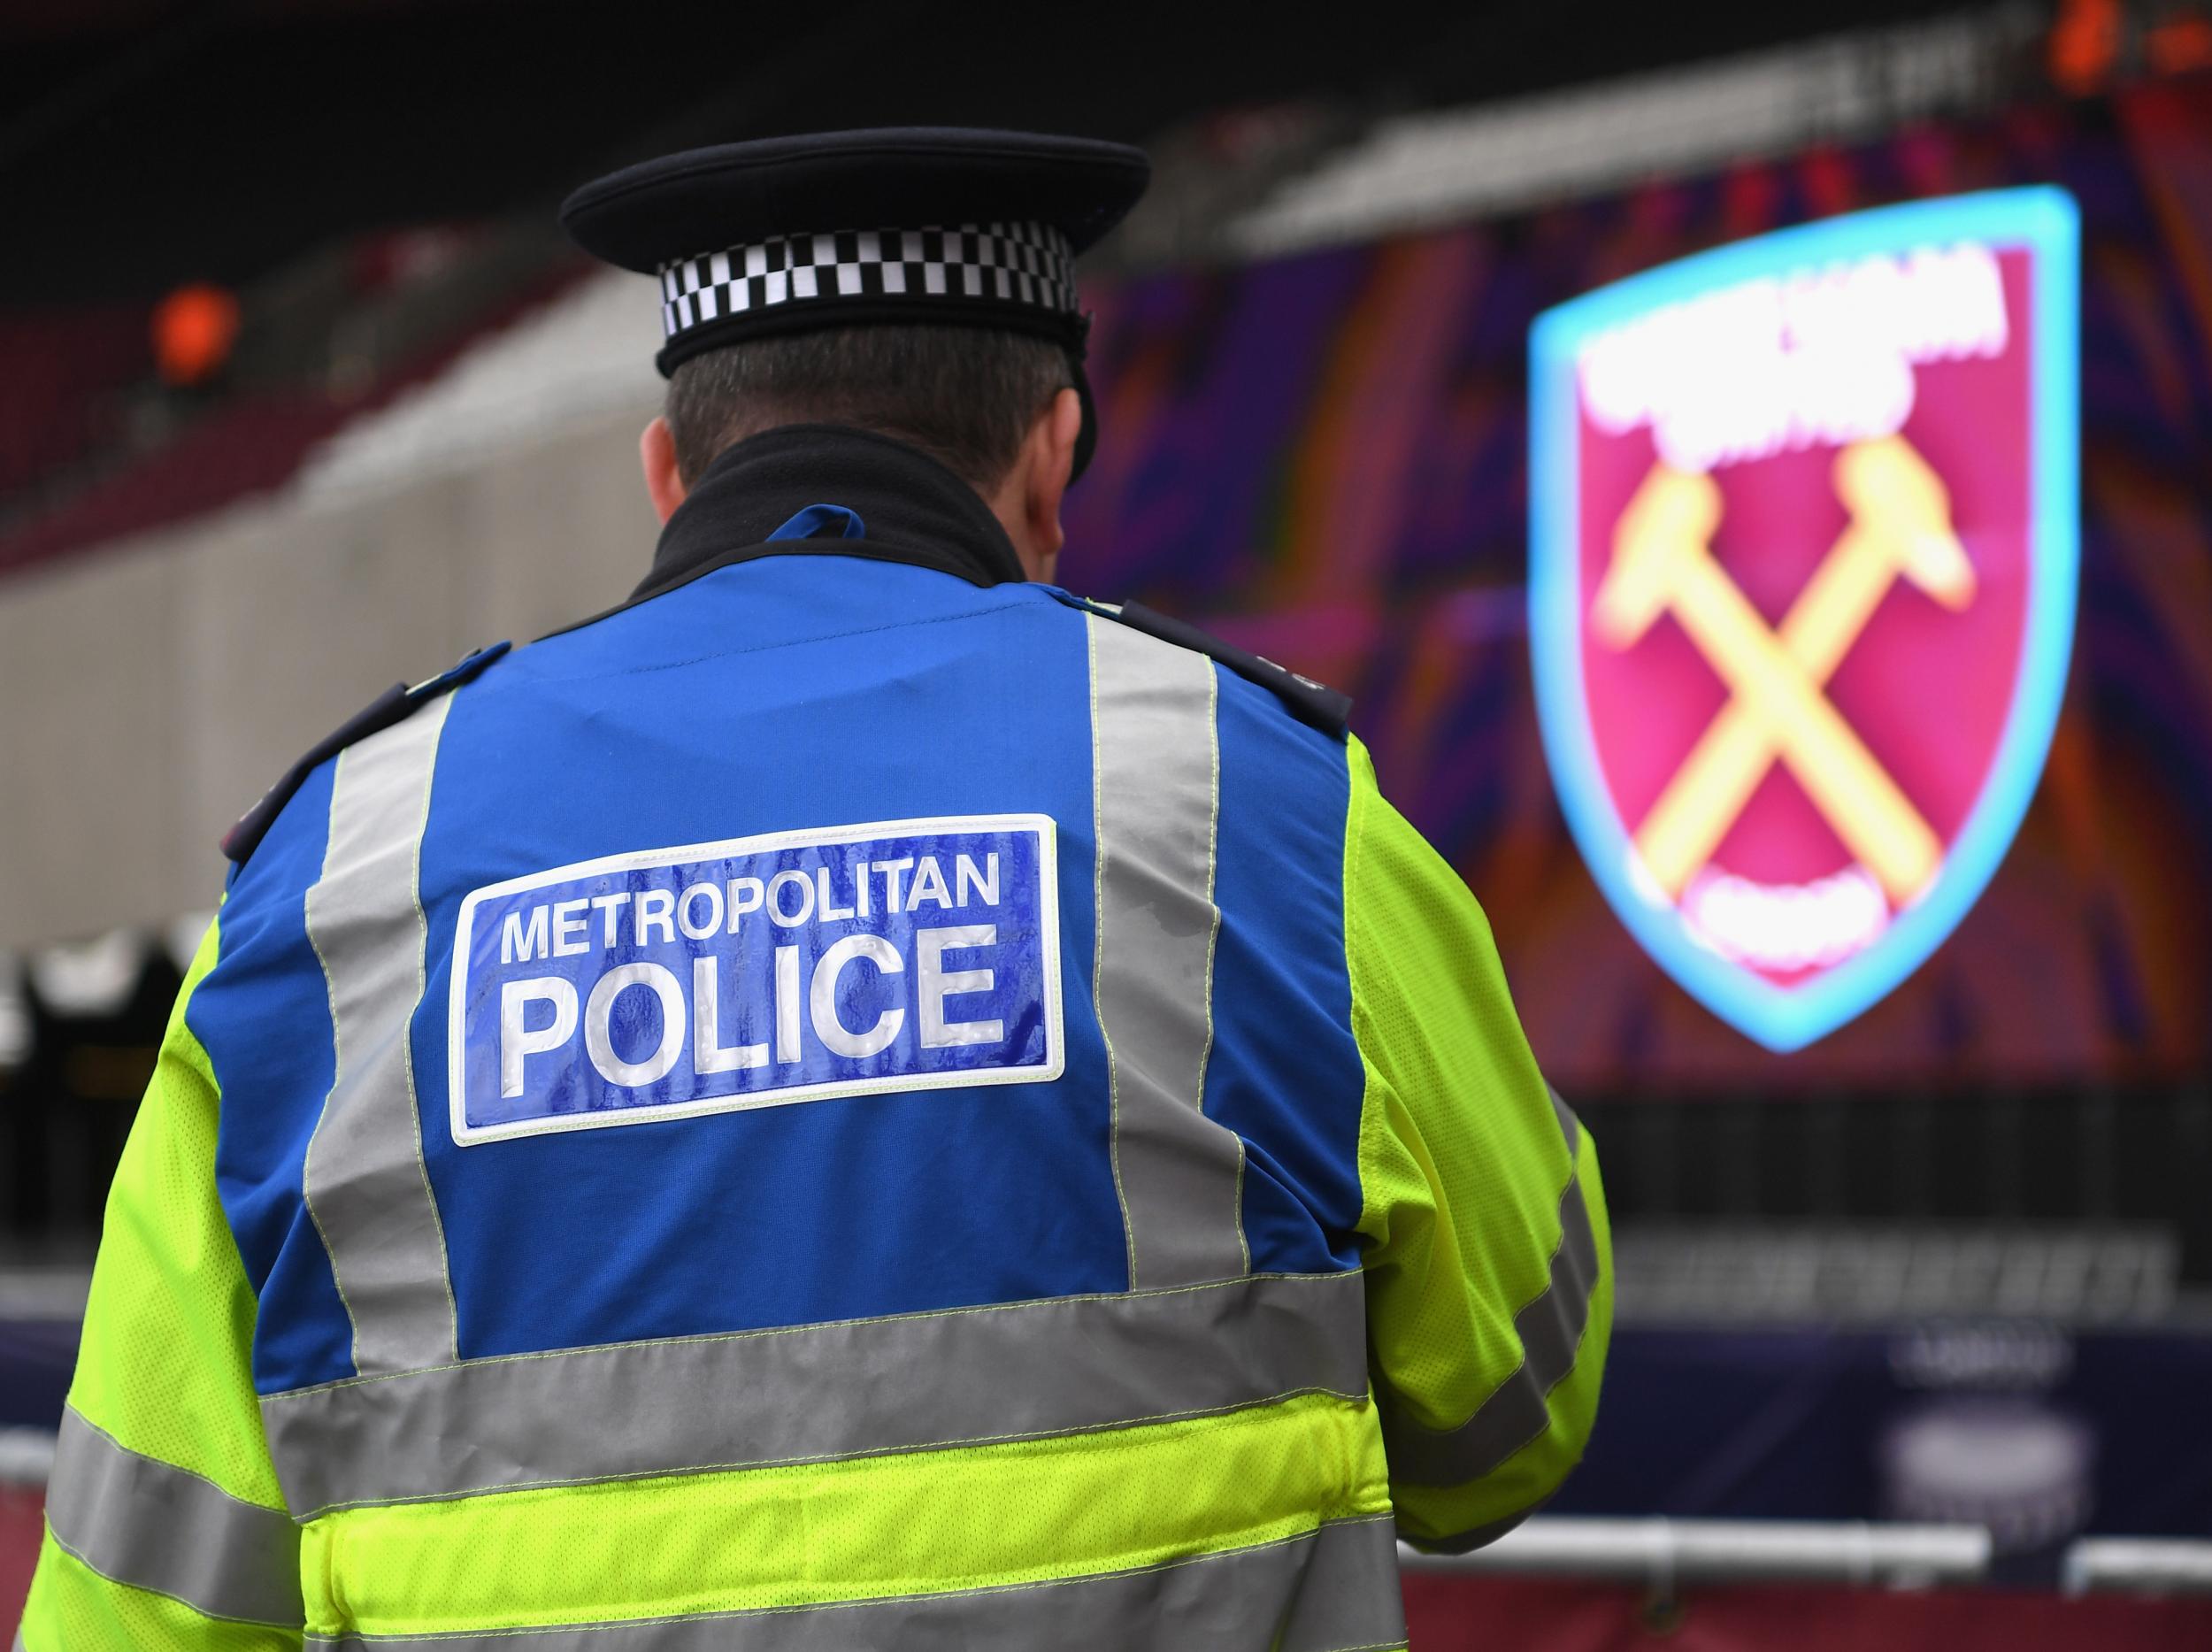 London Stadium is the most expensive ground to police